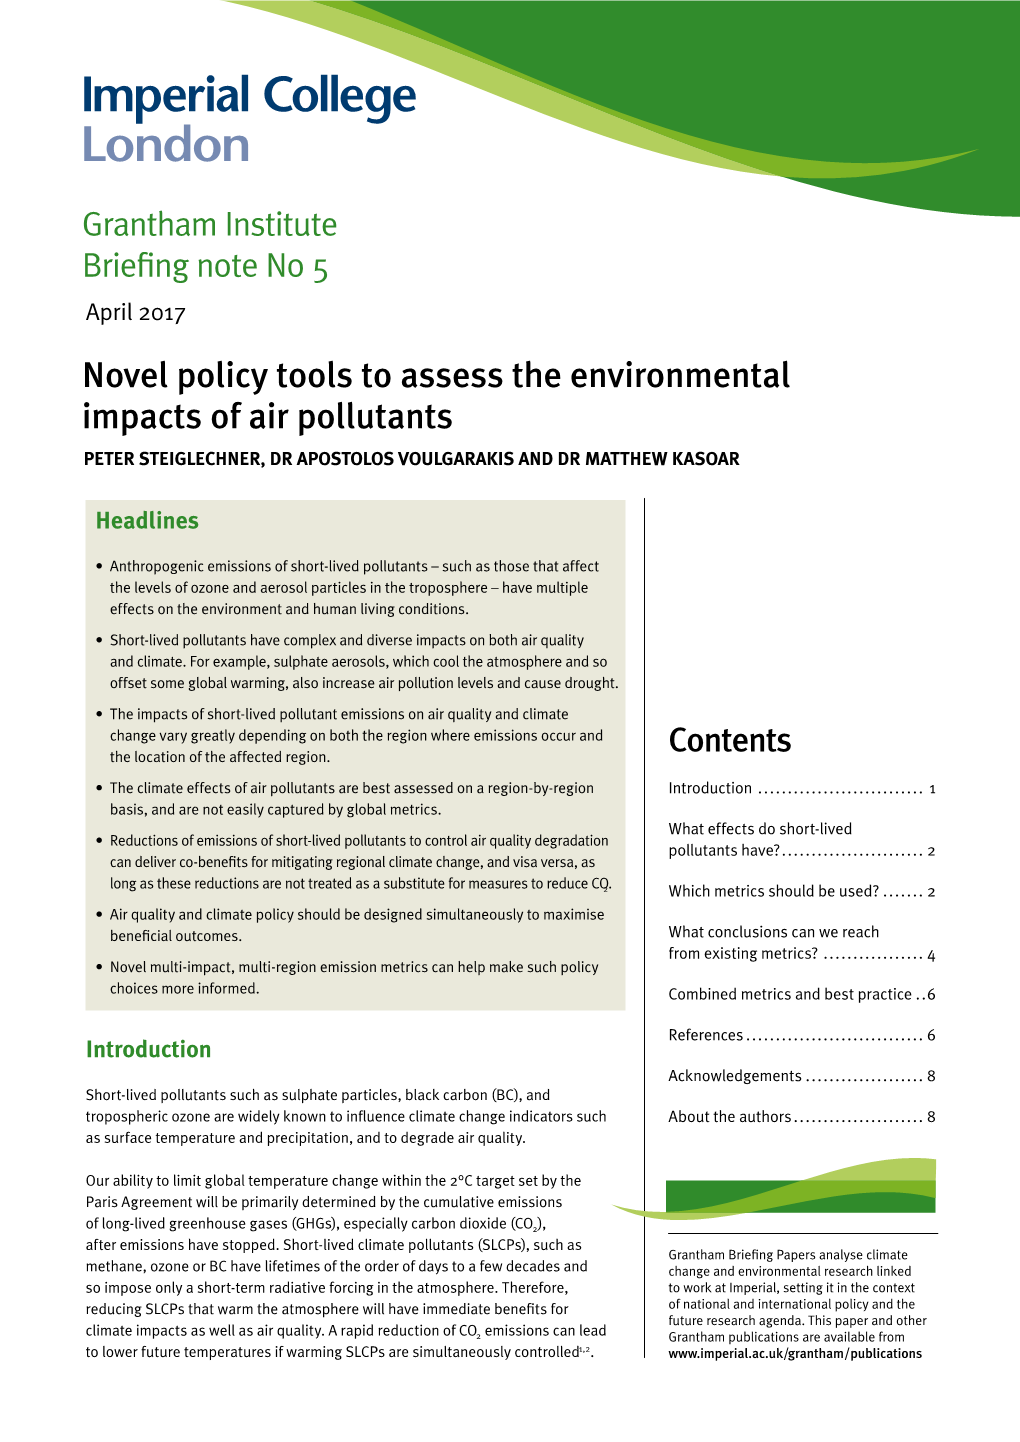 Novel Policy Tools to Assess the Environmental Impacts of Air Pollutants PETER STEIGLECHNER, DR APOSTOLOS VOULGARAKIS and DR MATTHEW KASOAR